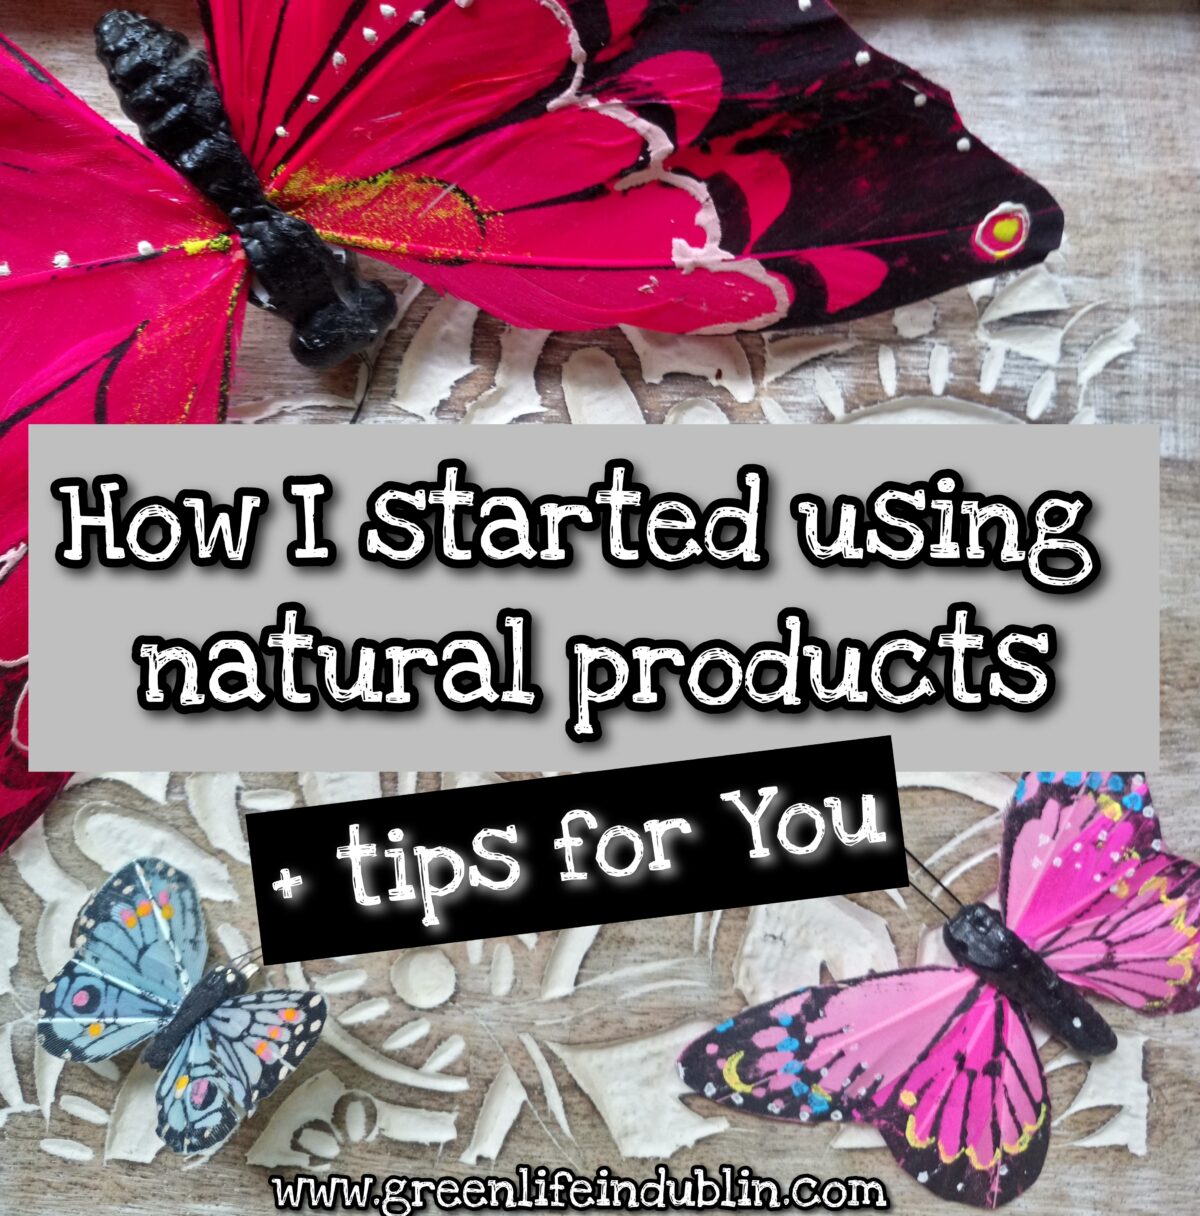 how I started using natural products - Green Life In Dublin